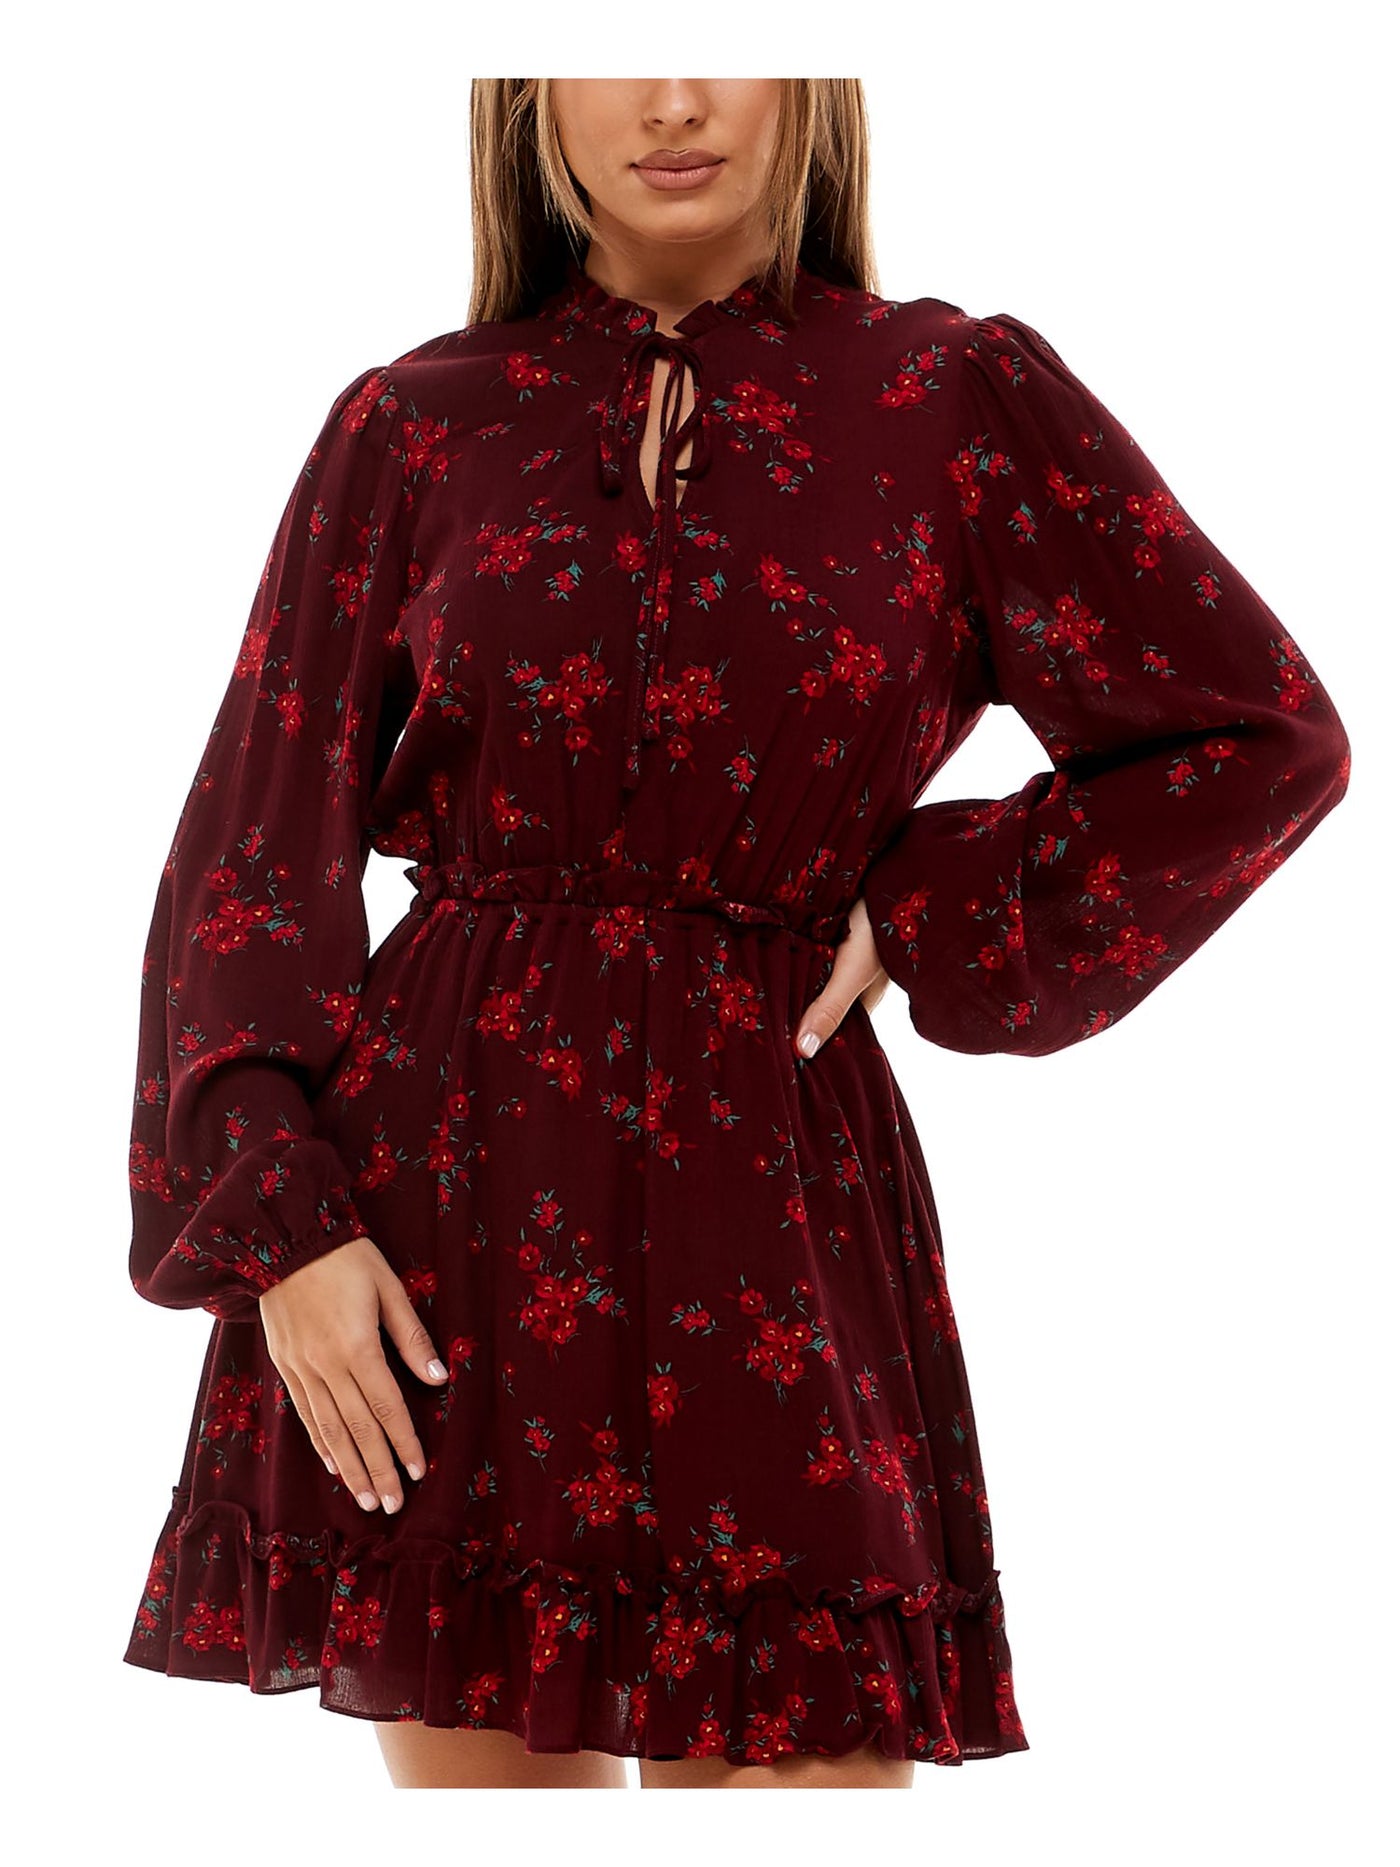 B DARLIN Womens Burgundy Ruffled Split Neck With Tie Floral Long Sleeve Short Party Fit + Flare Dress Juniors 15\16